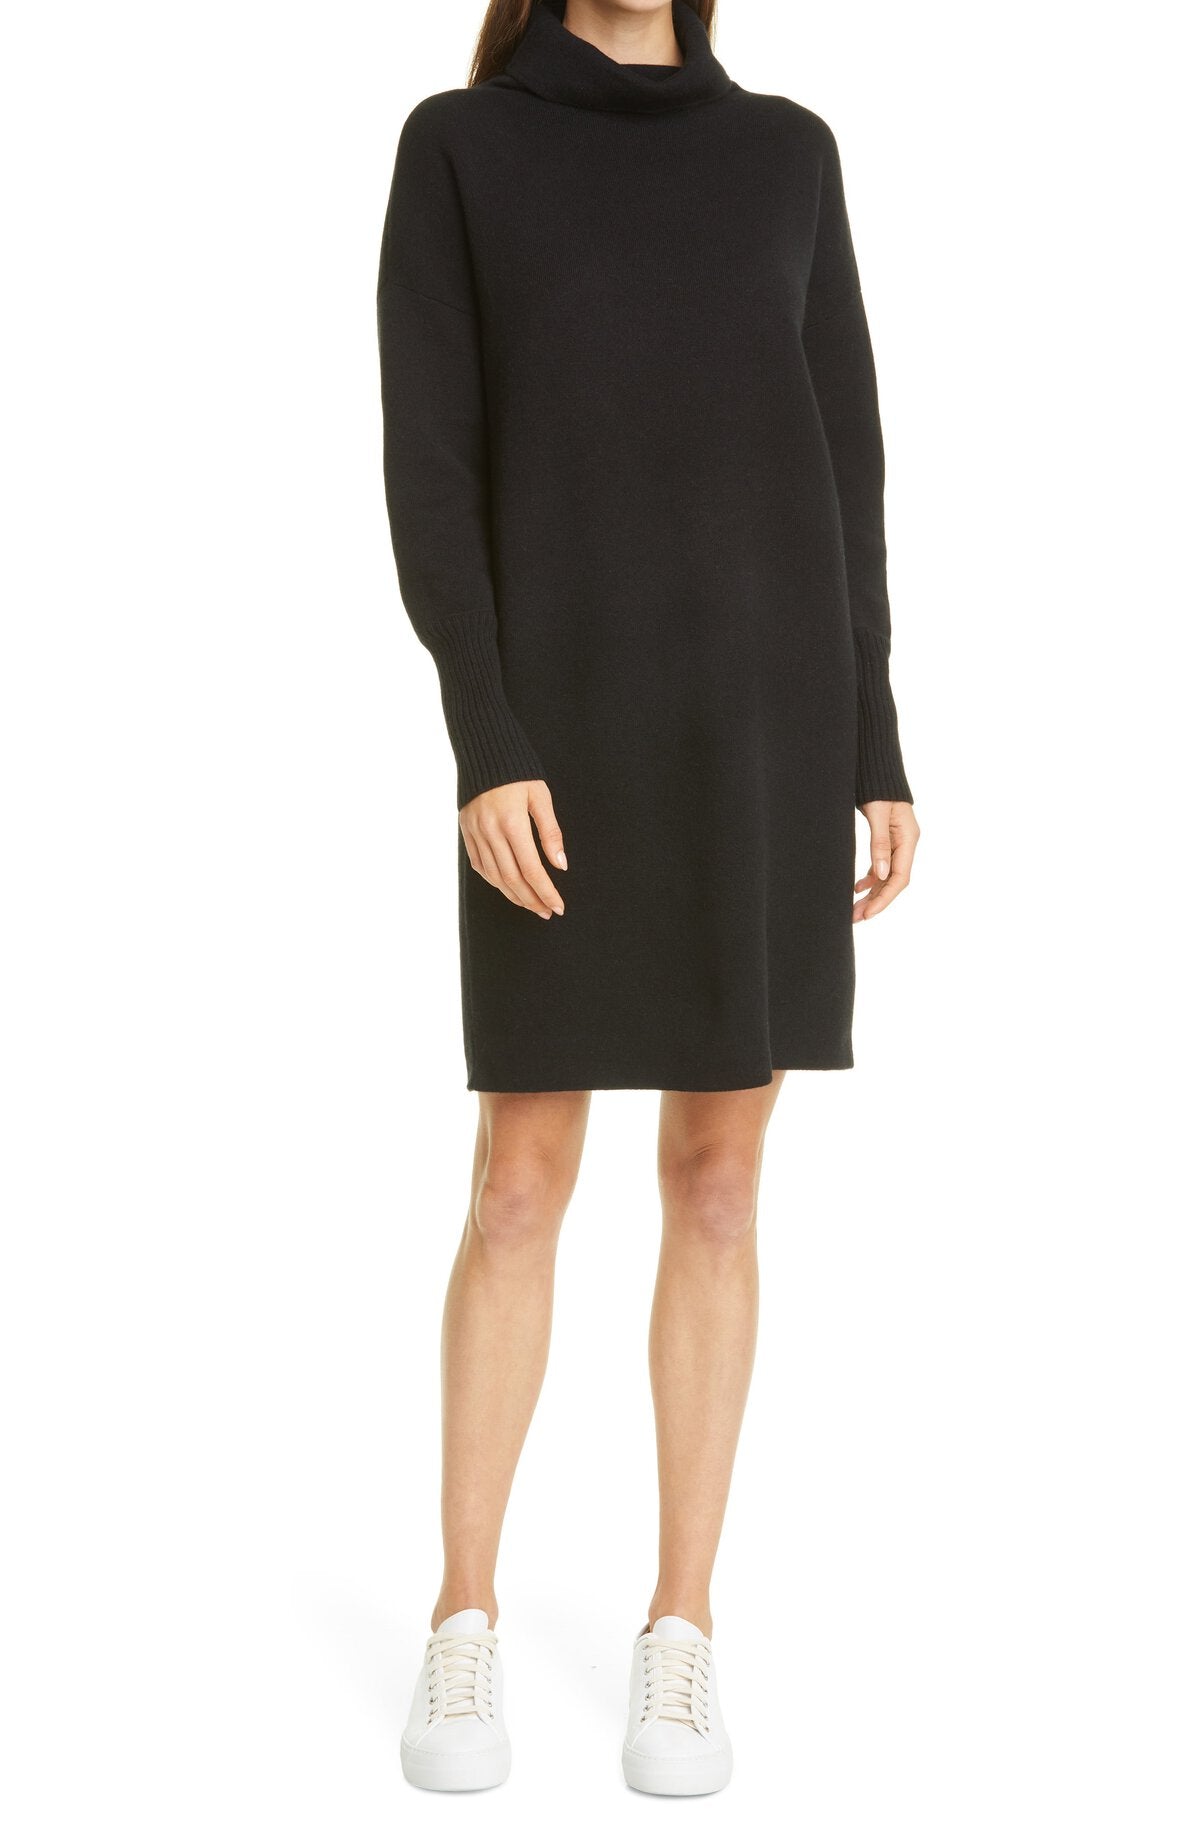 NORDSTROM SIGNATURE Cashmere Sweater Dress Size Small - XS